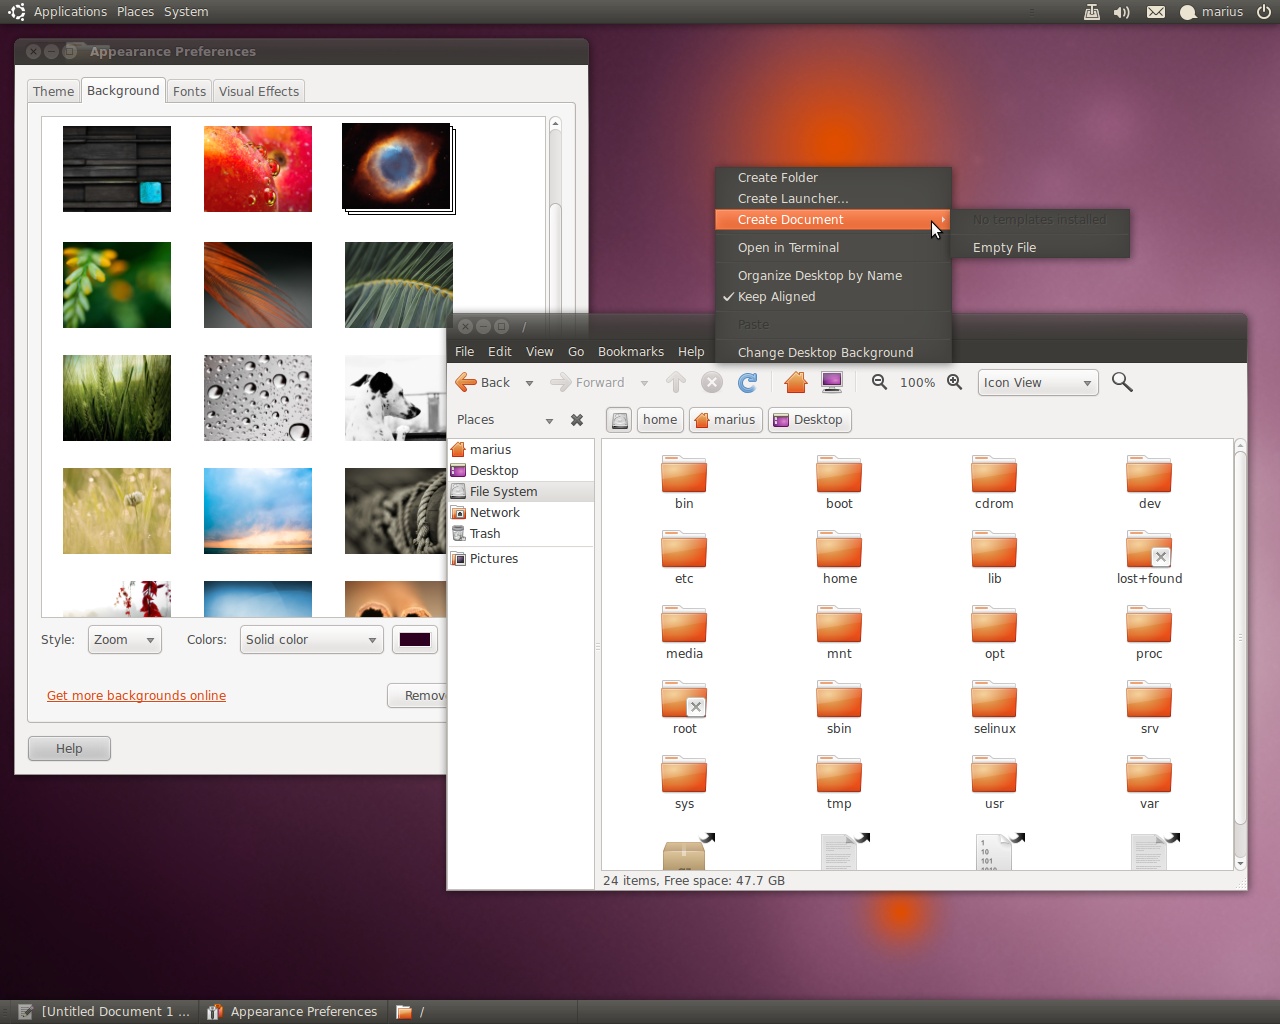 The New Wallpapers and Theme of Ubuntu Softpedia